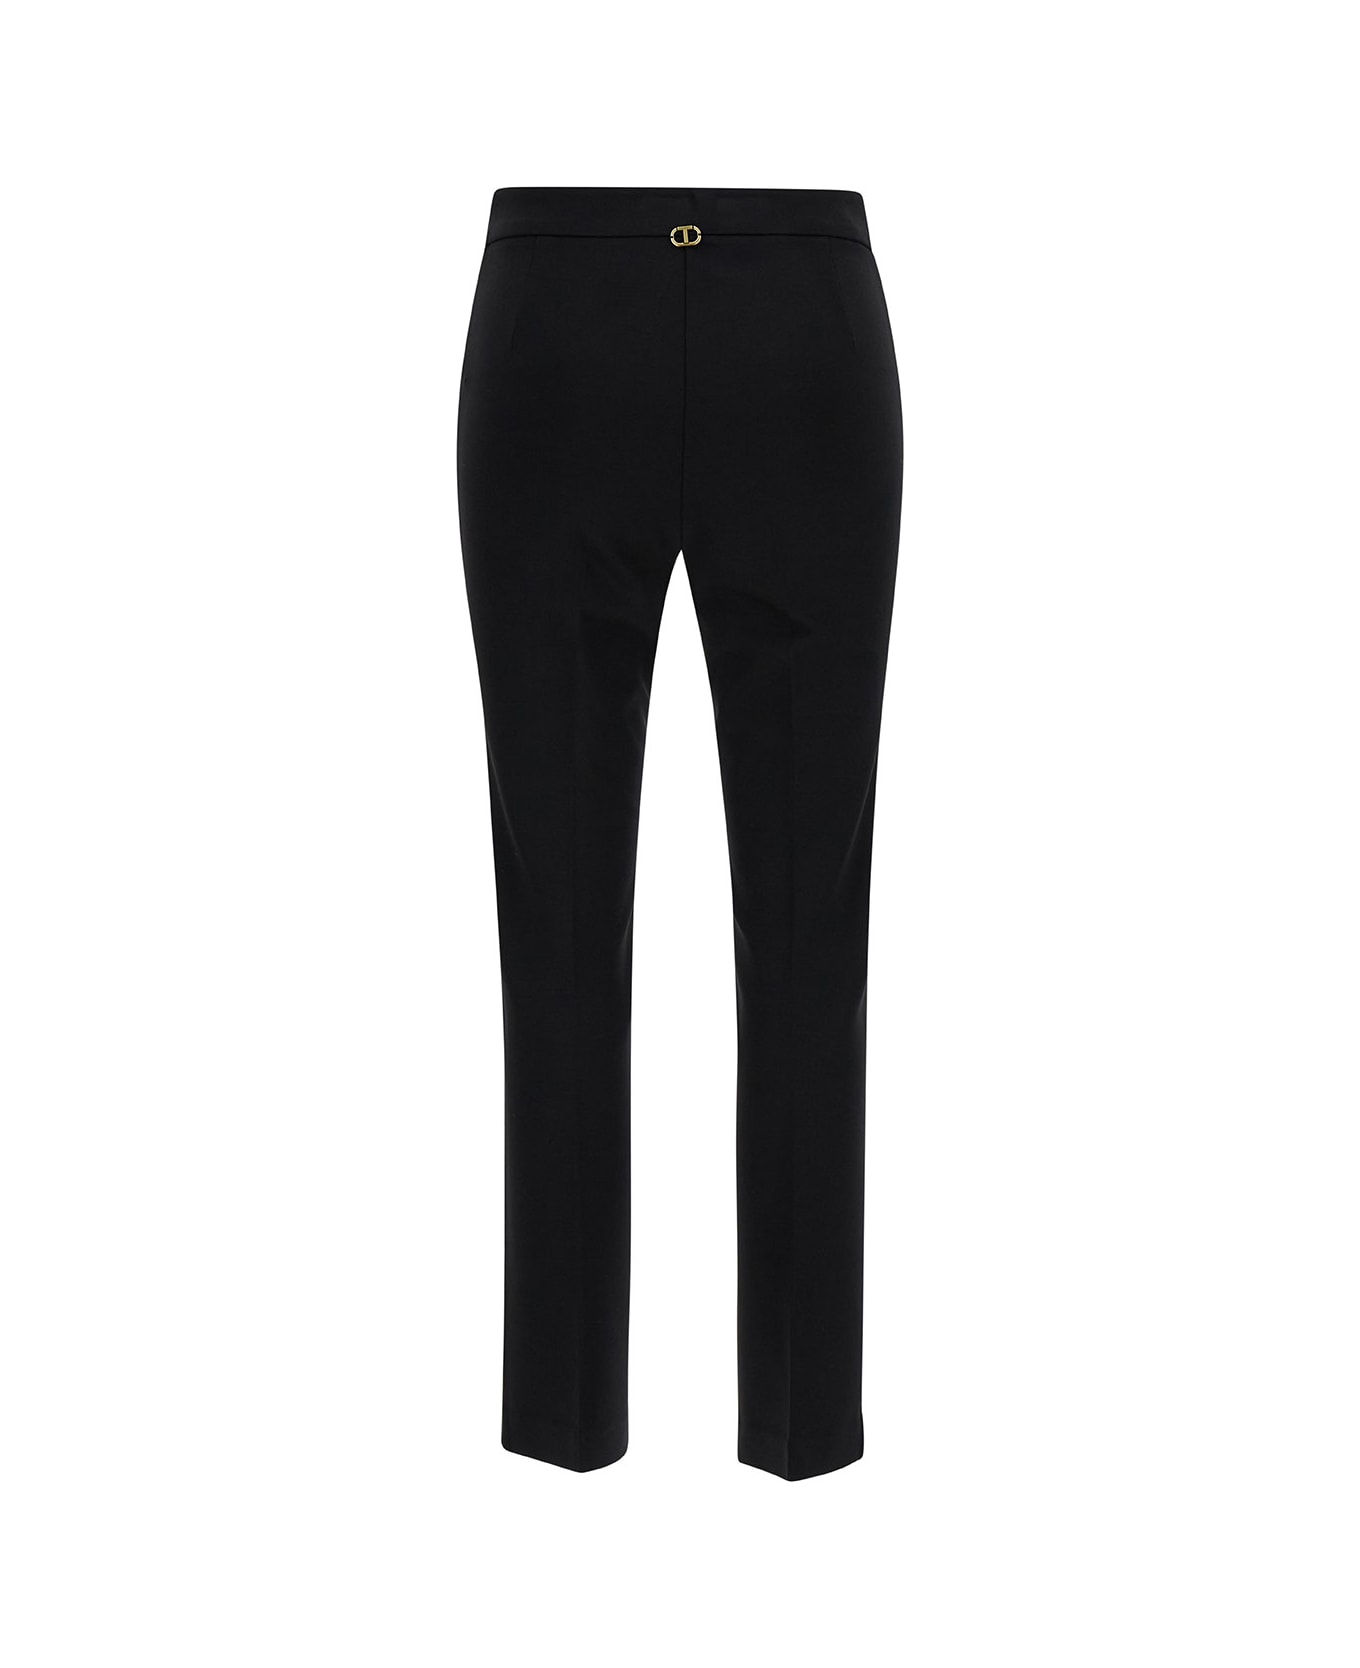 TwinSet Black Flare Pants With Oval T Buckle In Viscose Blend Woman - Black